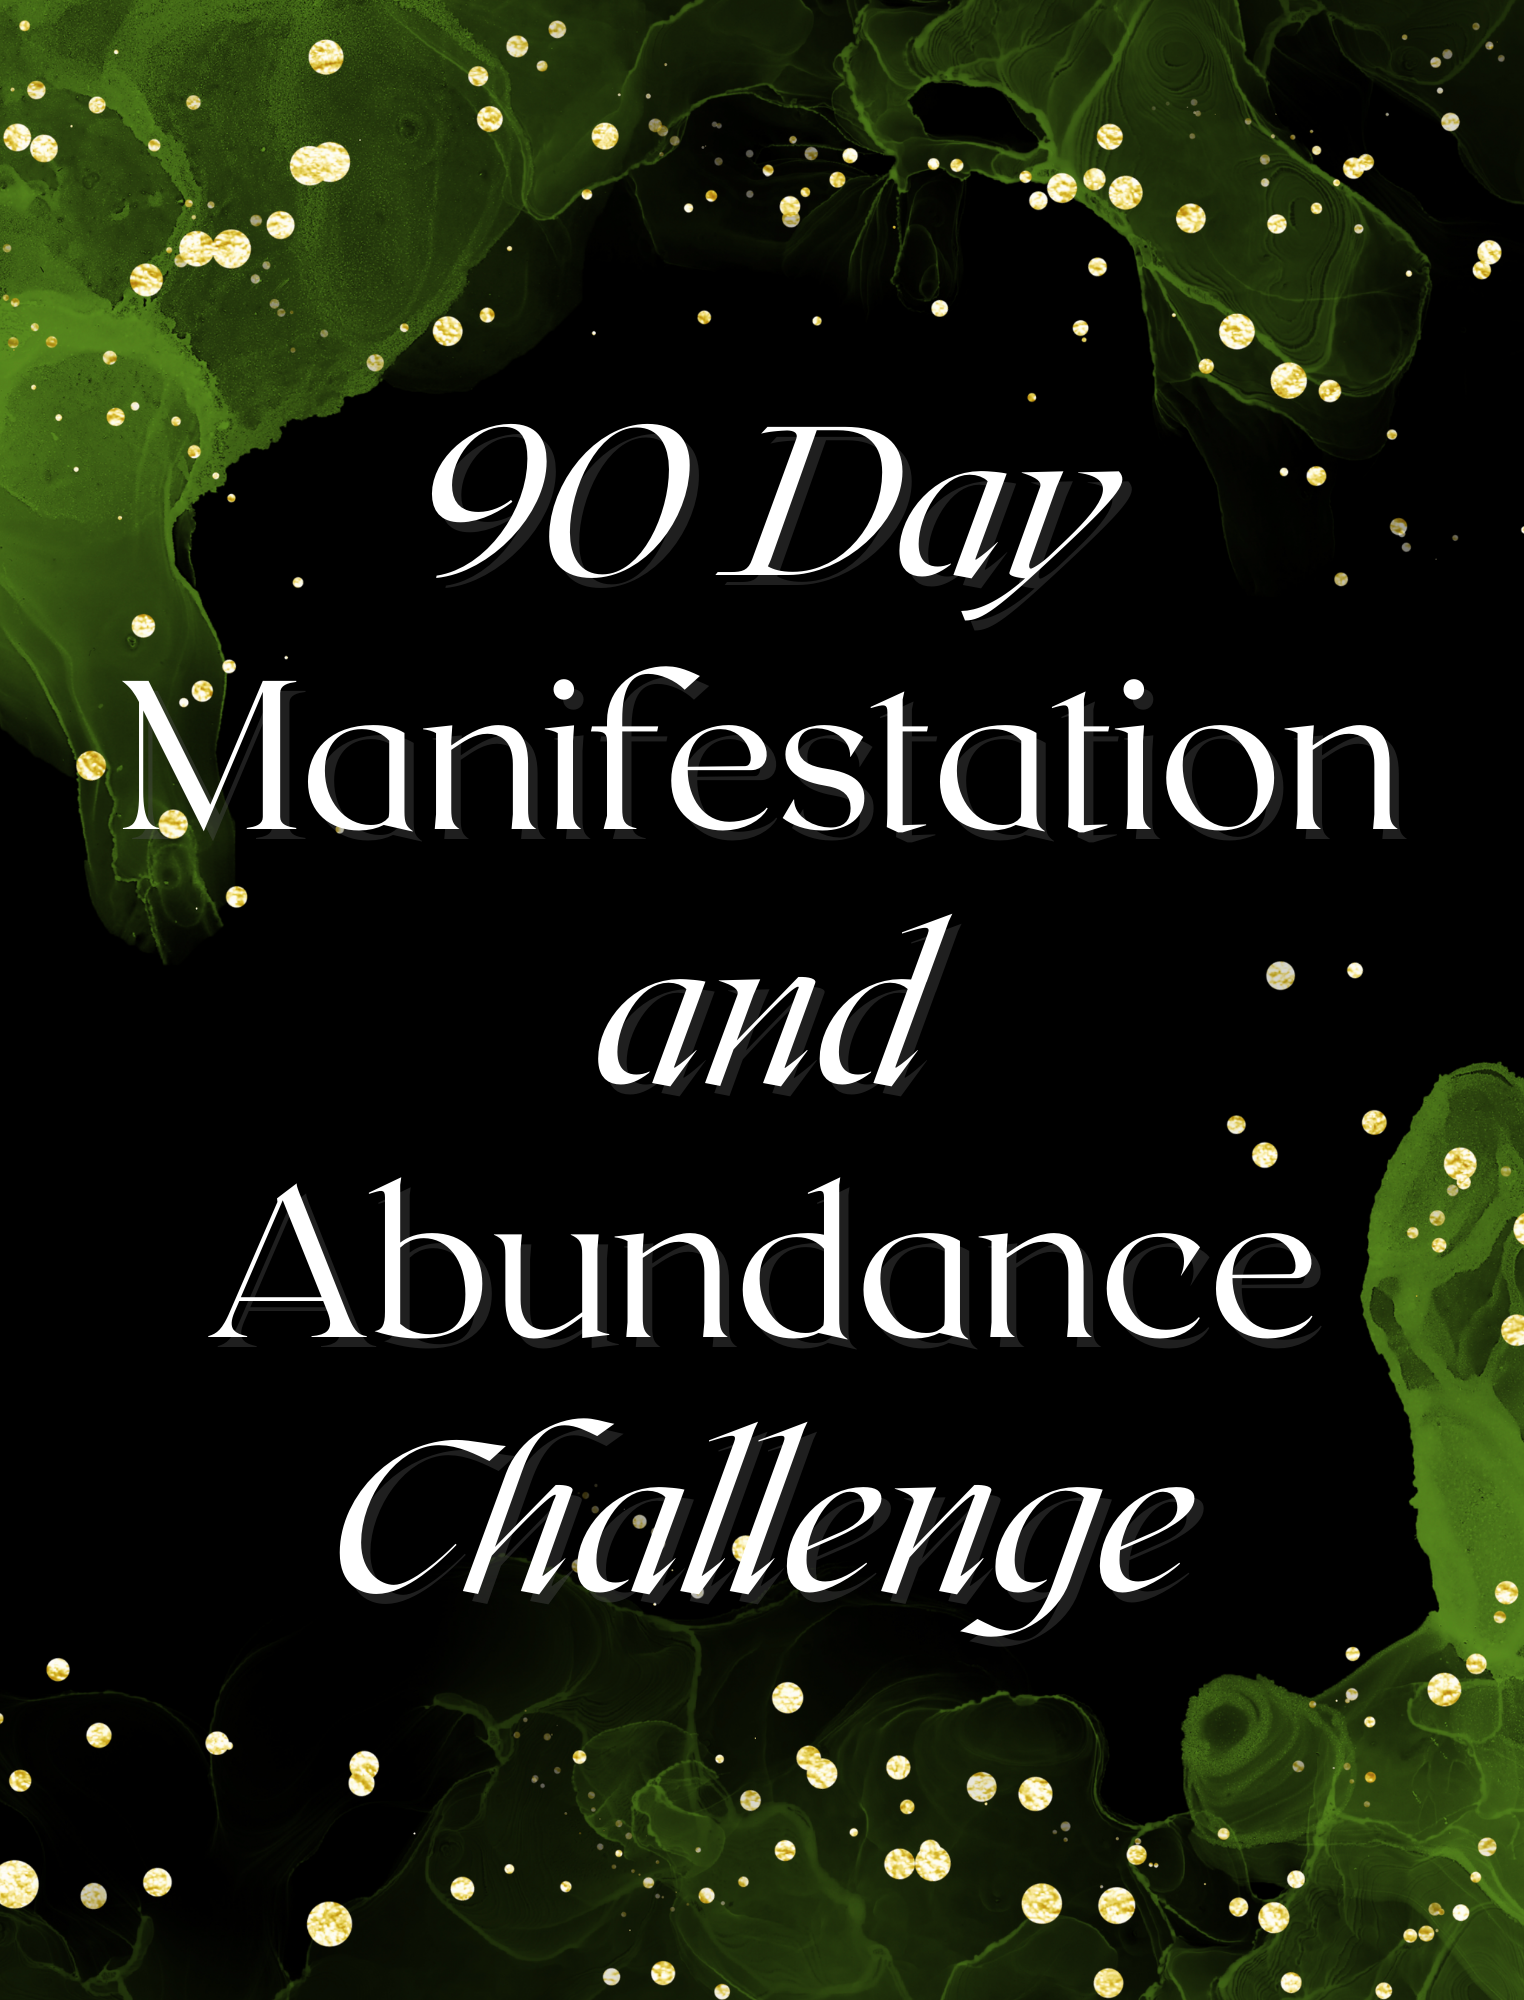 90 Day Manifestation and Abundance Challenge with black background, green whispies, and gold dots